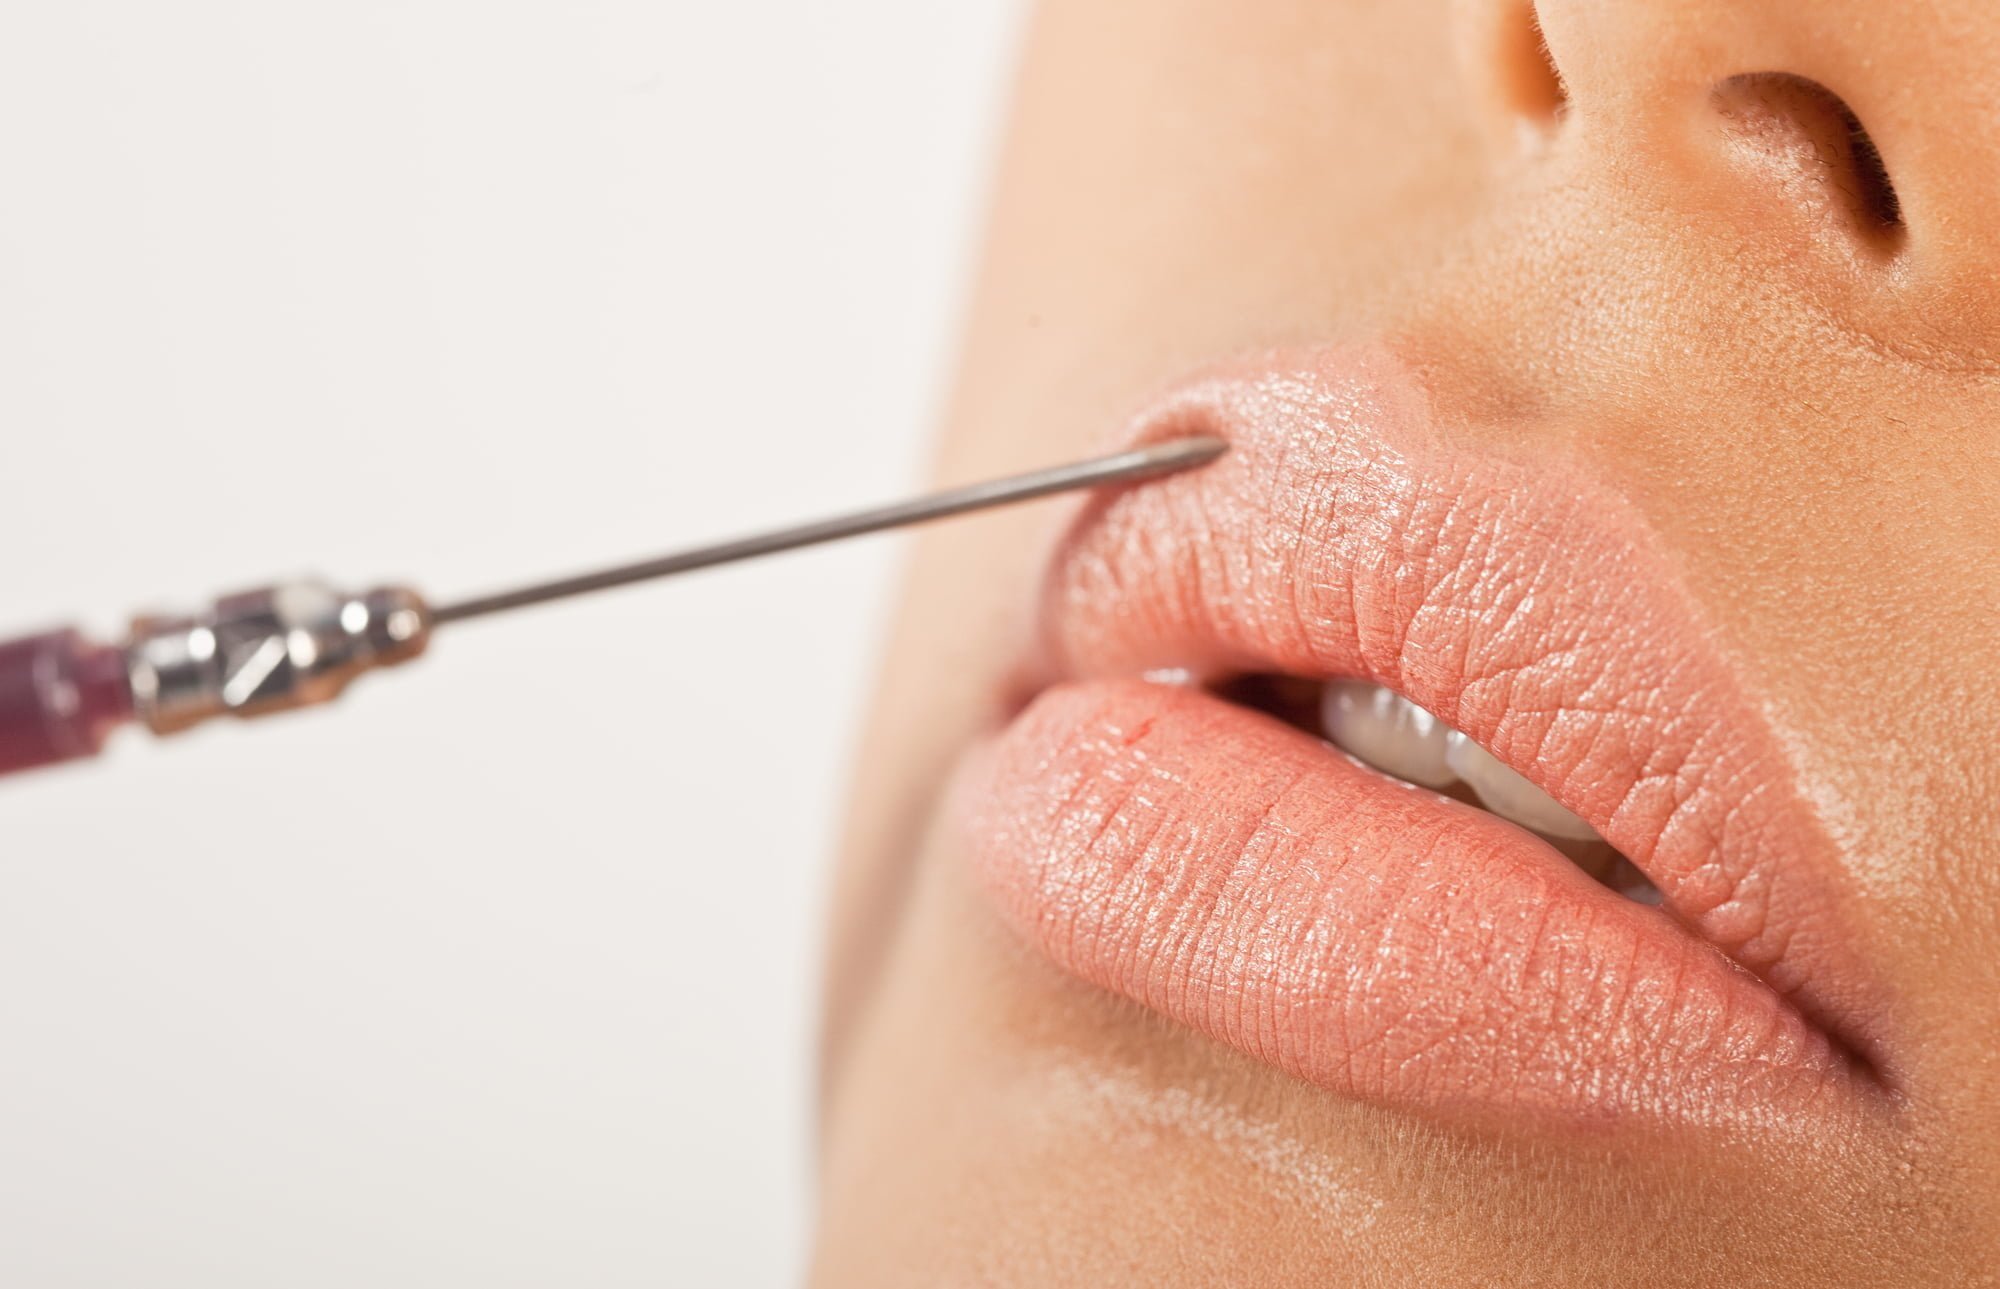 Lip Enhancement Treatment. Closeup of a hypodermic needle being using to inject the upper lip in an enhancement treatment.